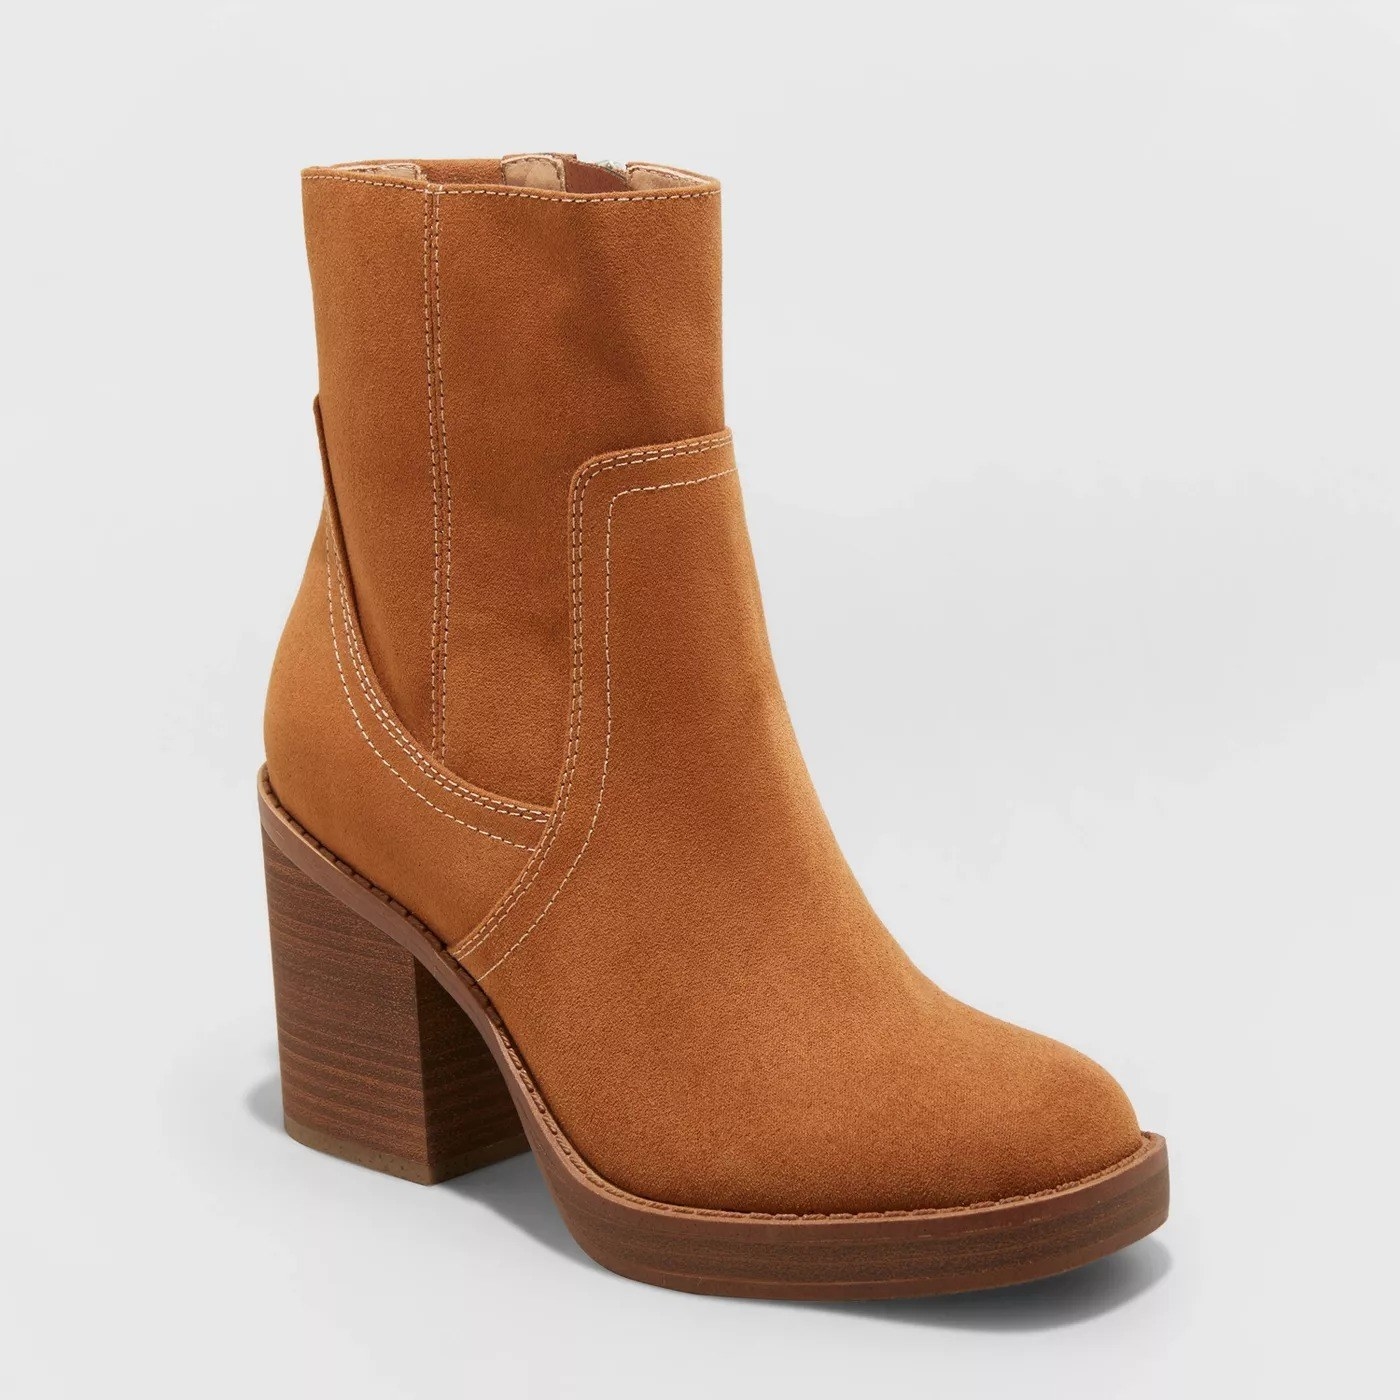 The camel colored heel boots, with light colored stitching, and block heel